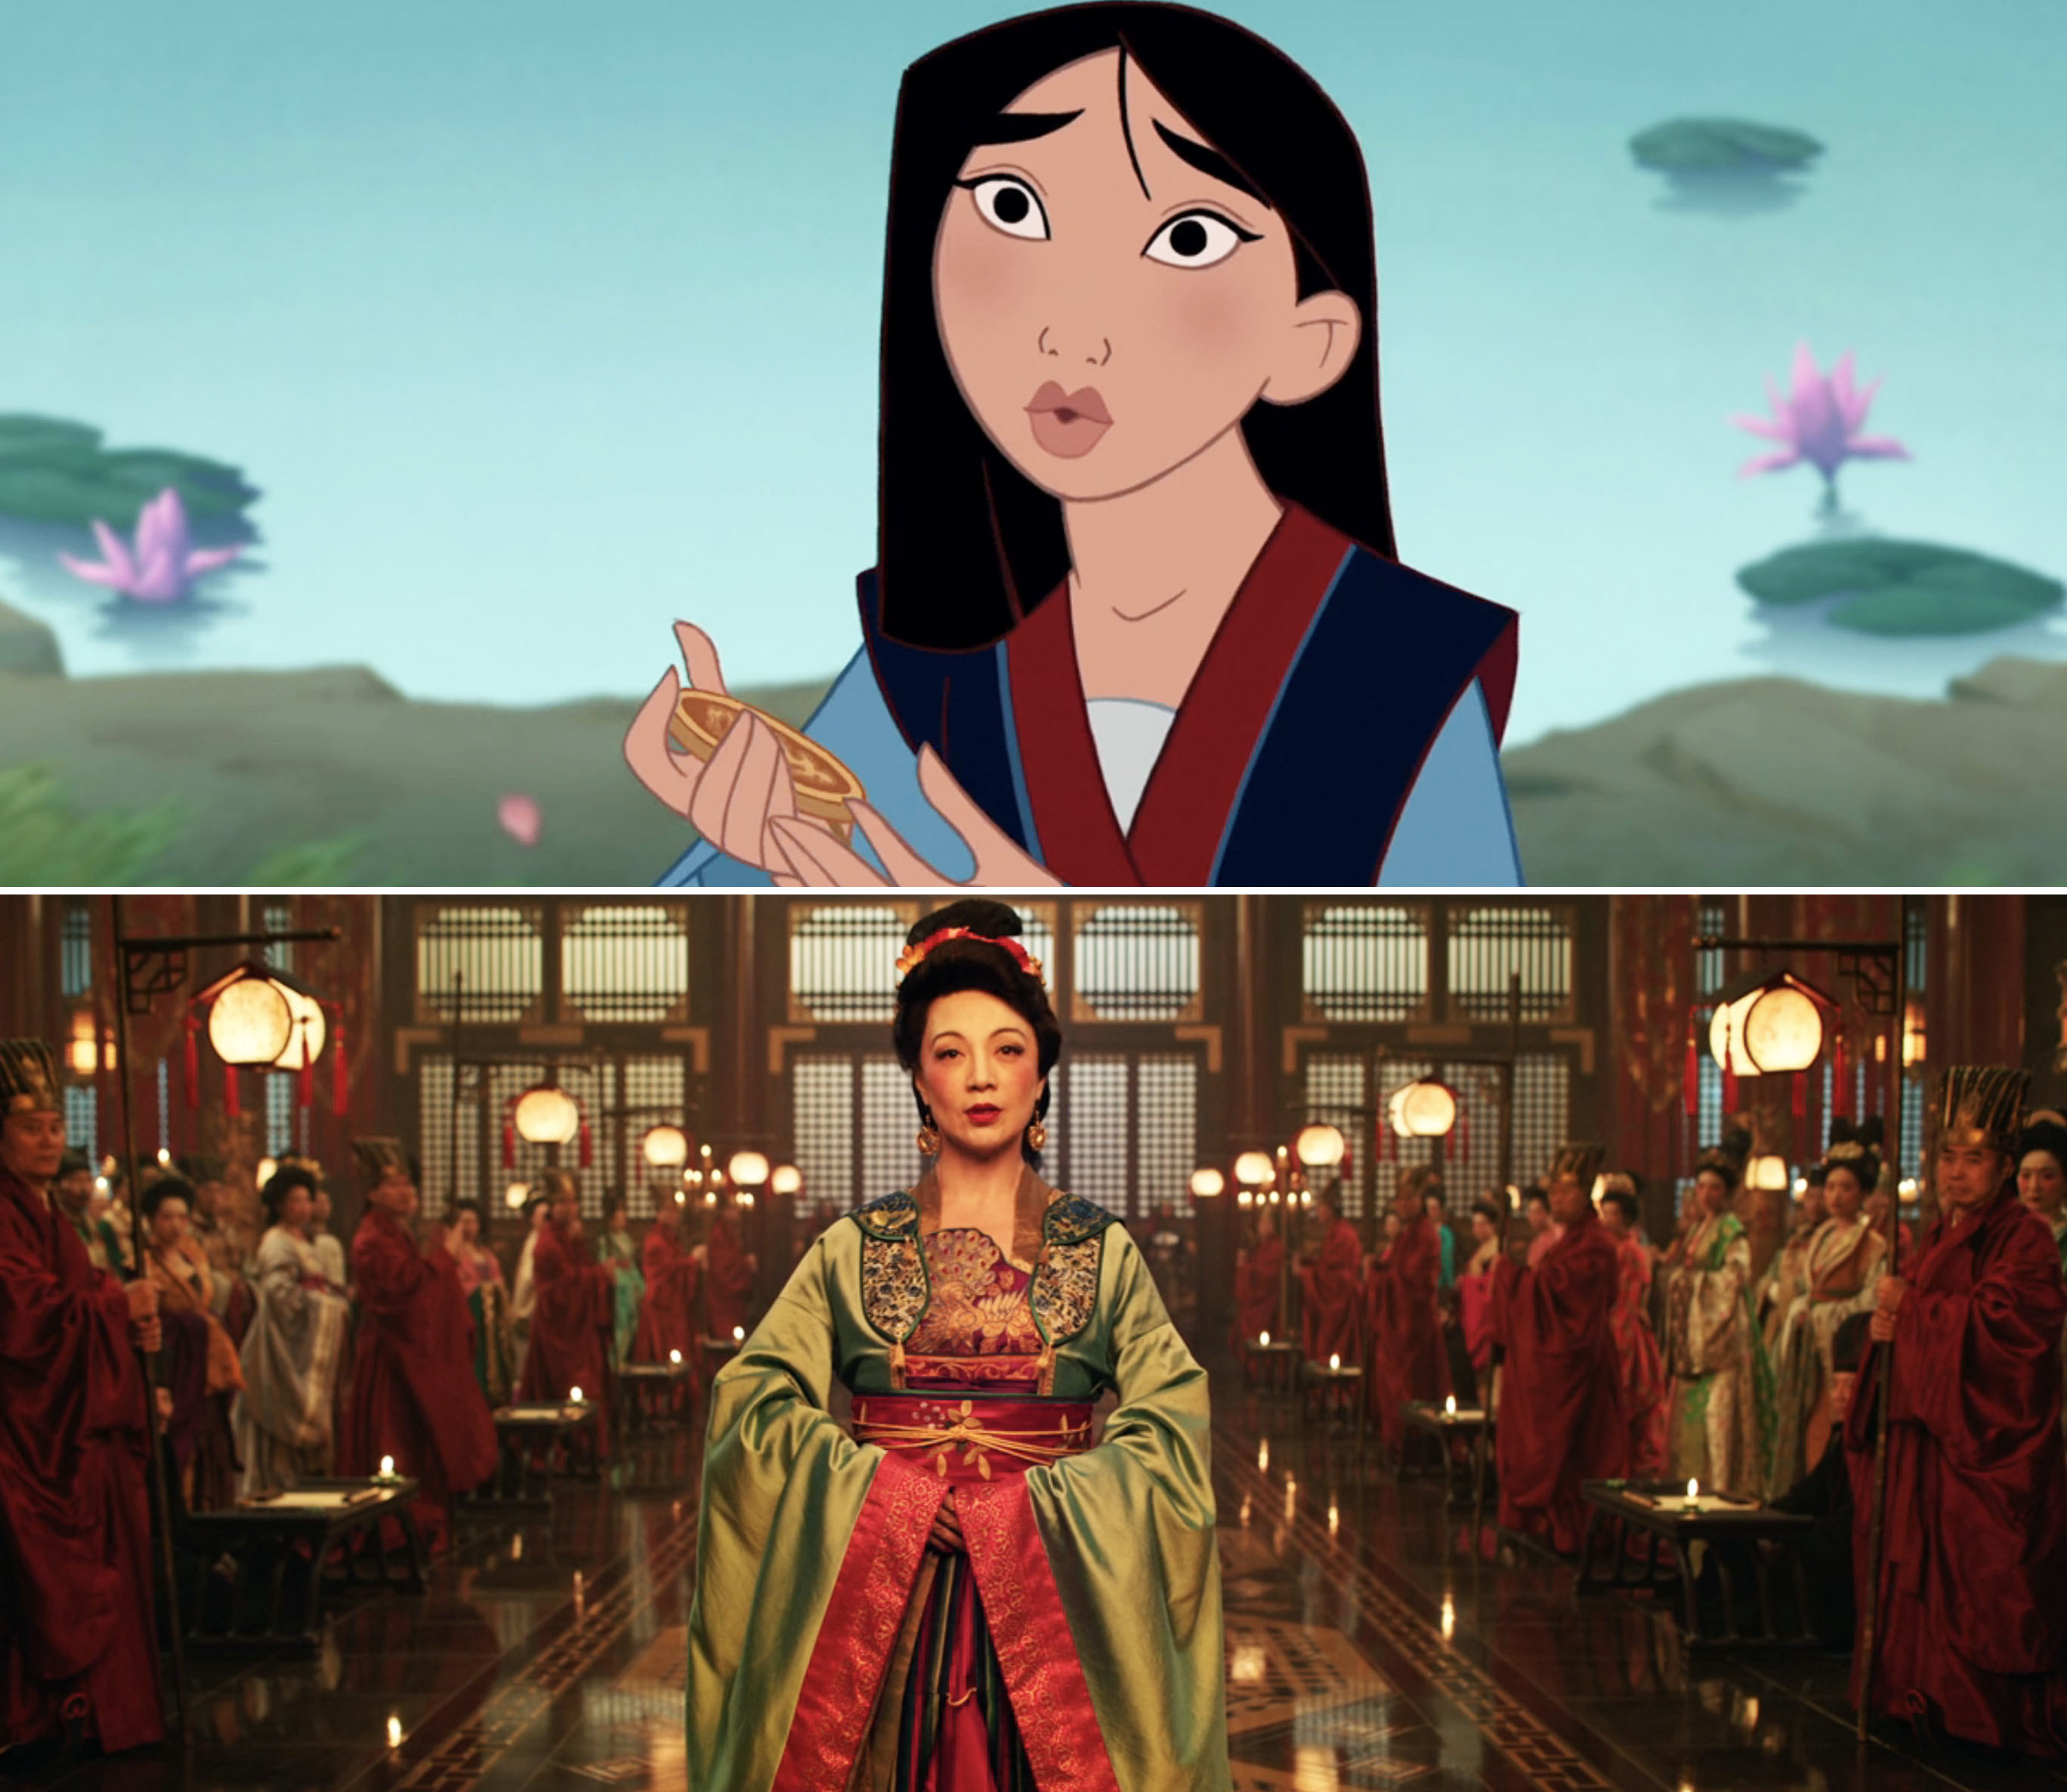 Screen grabs from both &quot;Mulan&quot; films